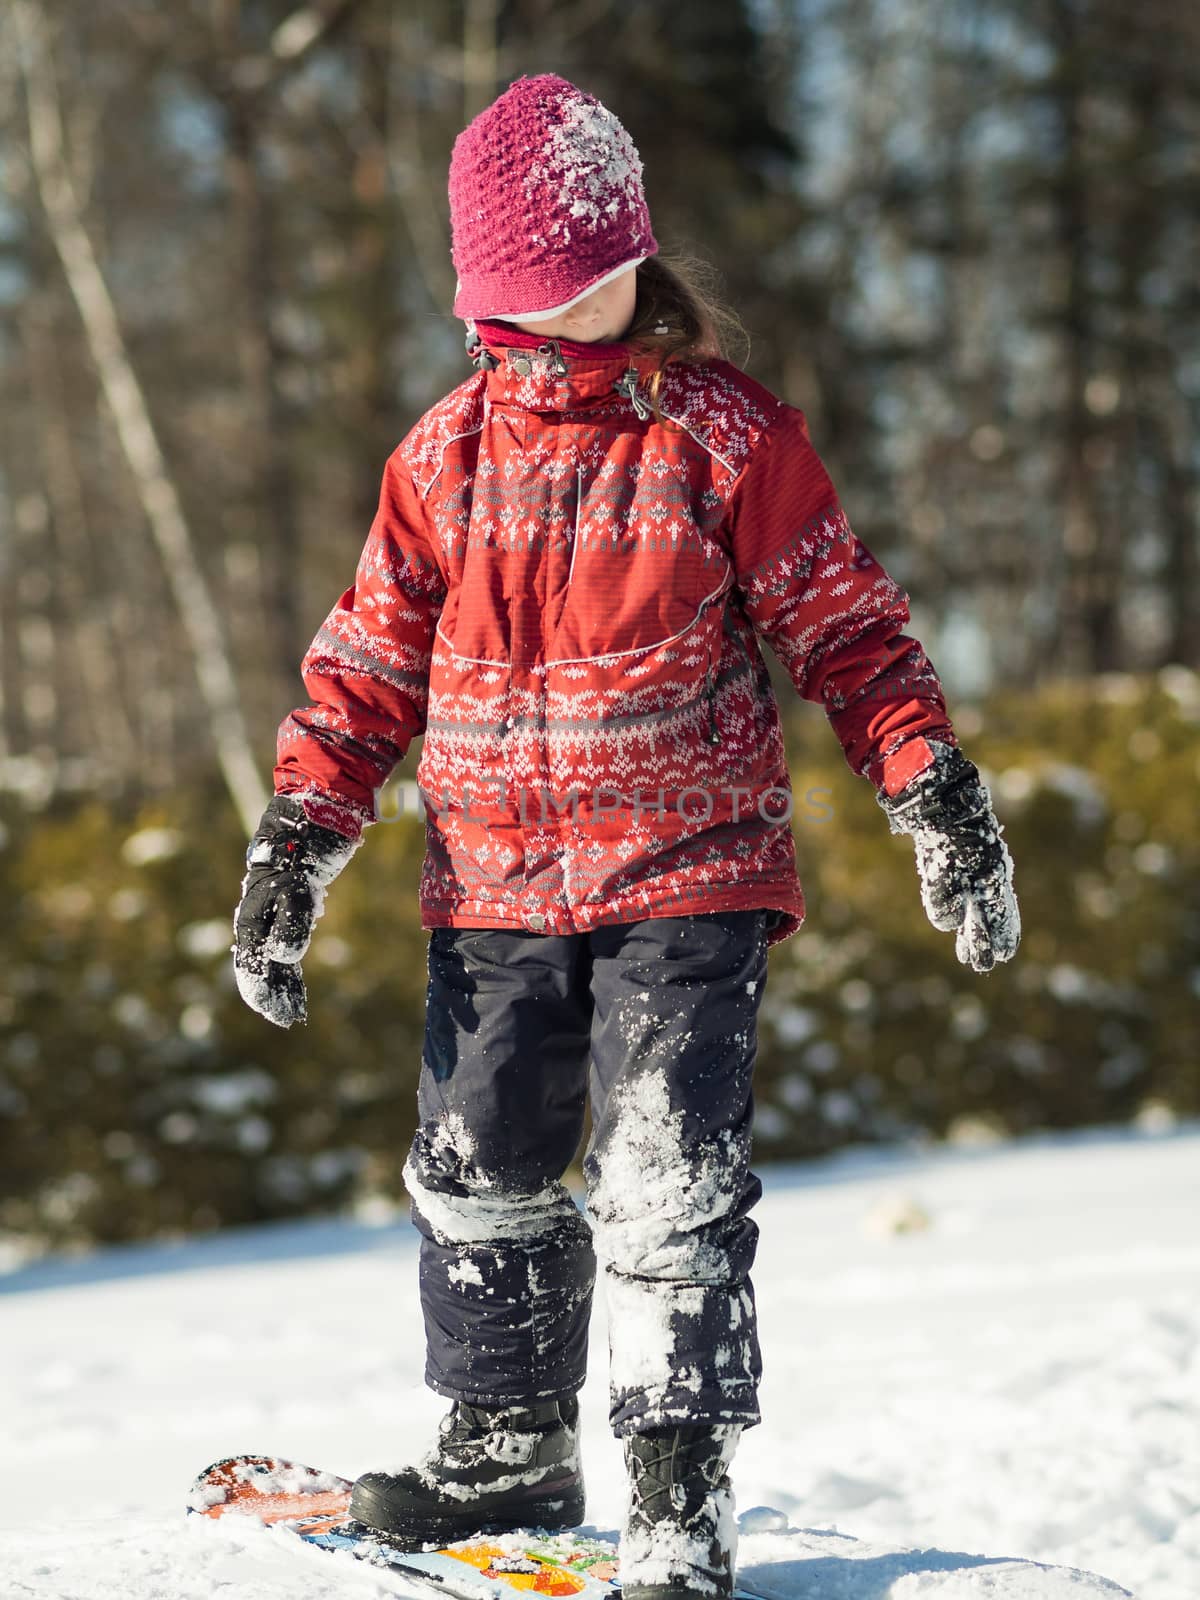 Girl playing in the snow with a snowboard